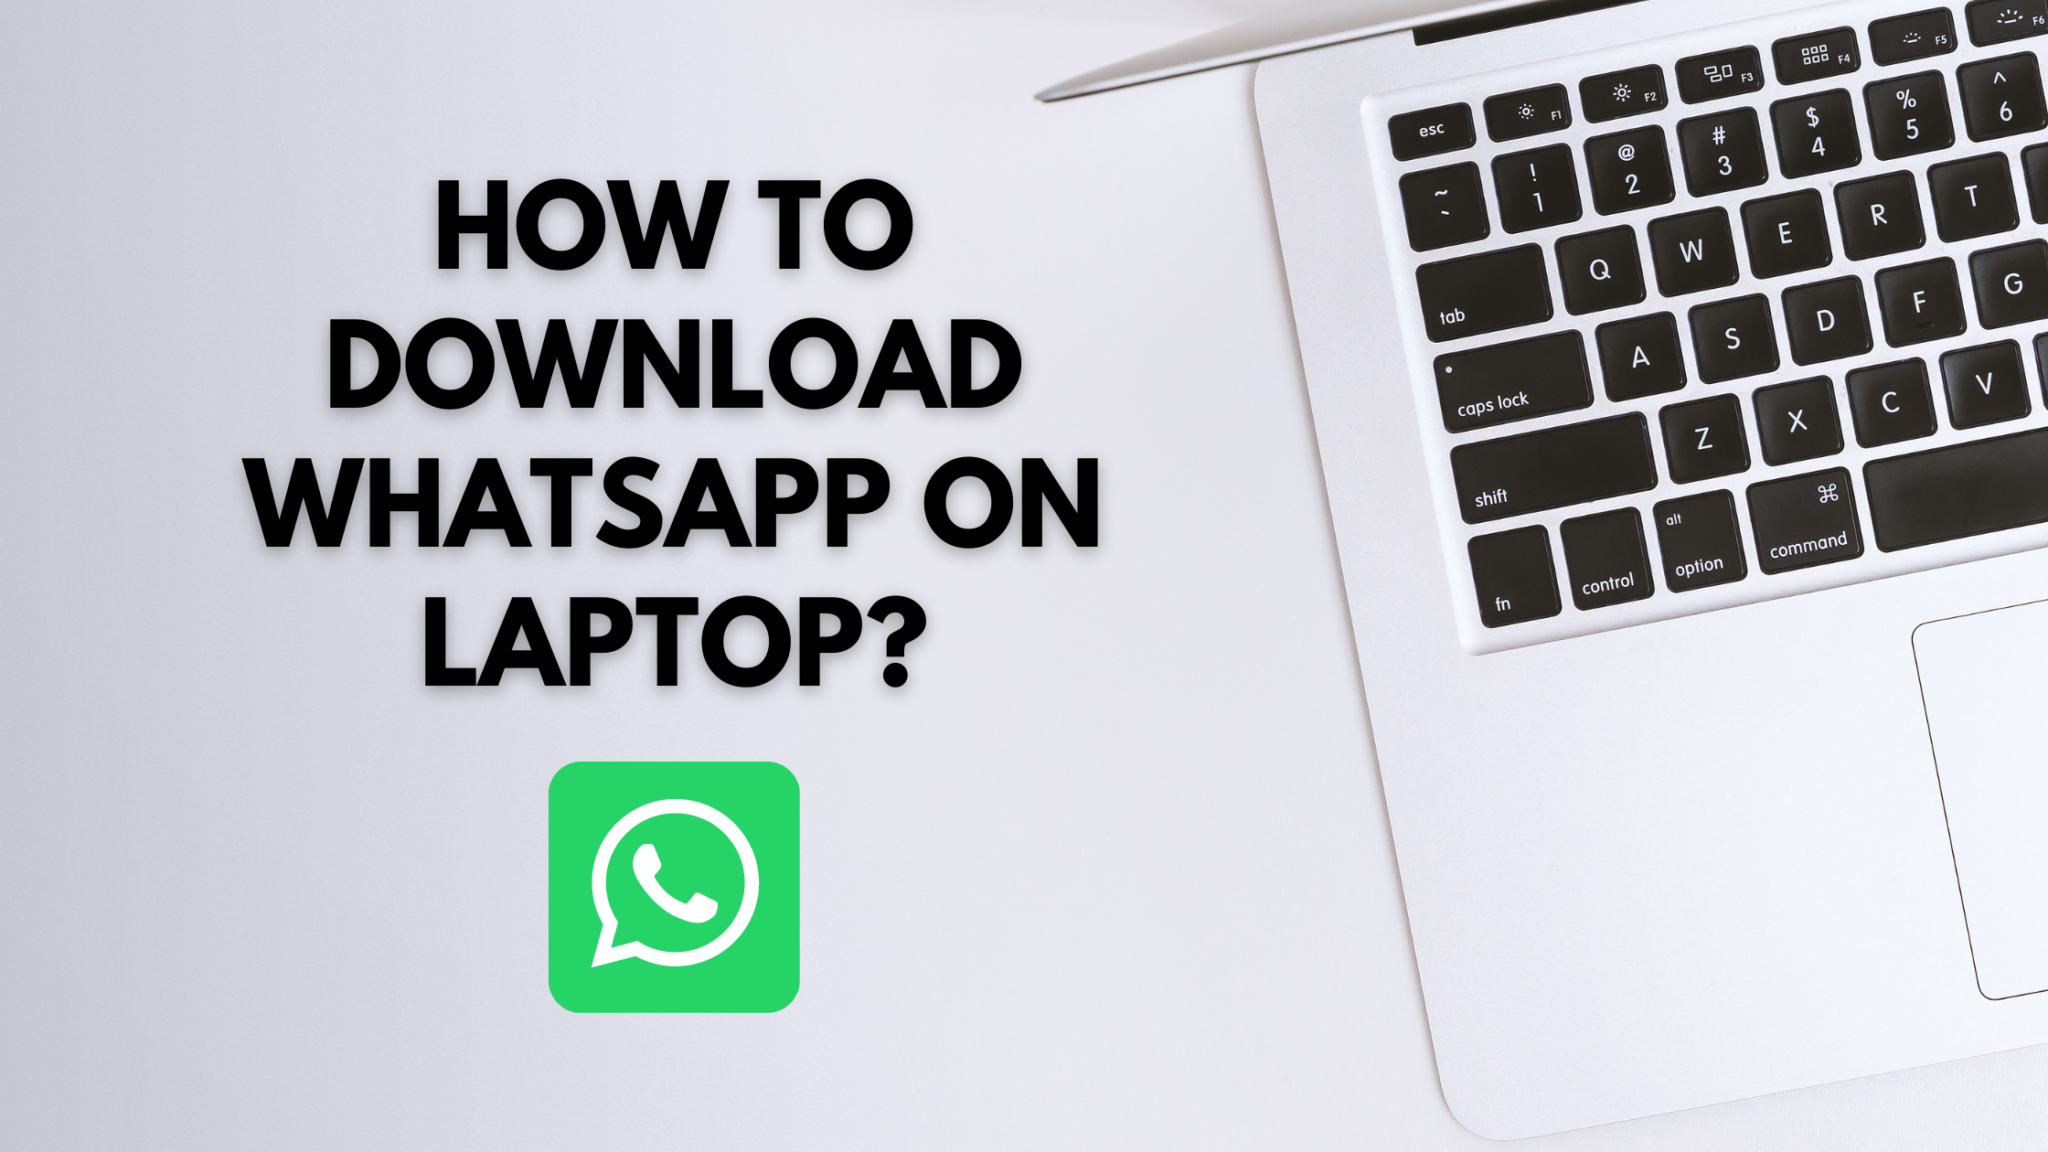 How to download WhatsApp on Laptop?